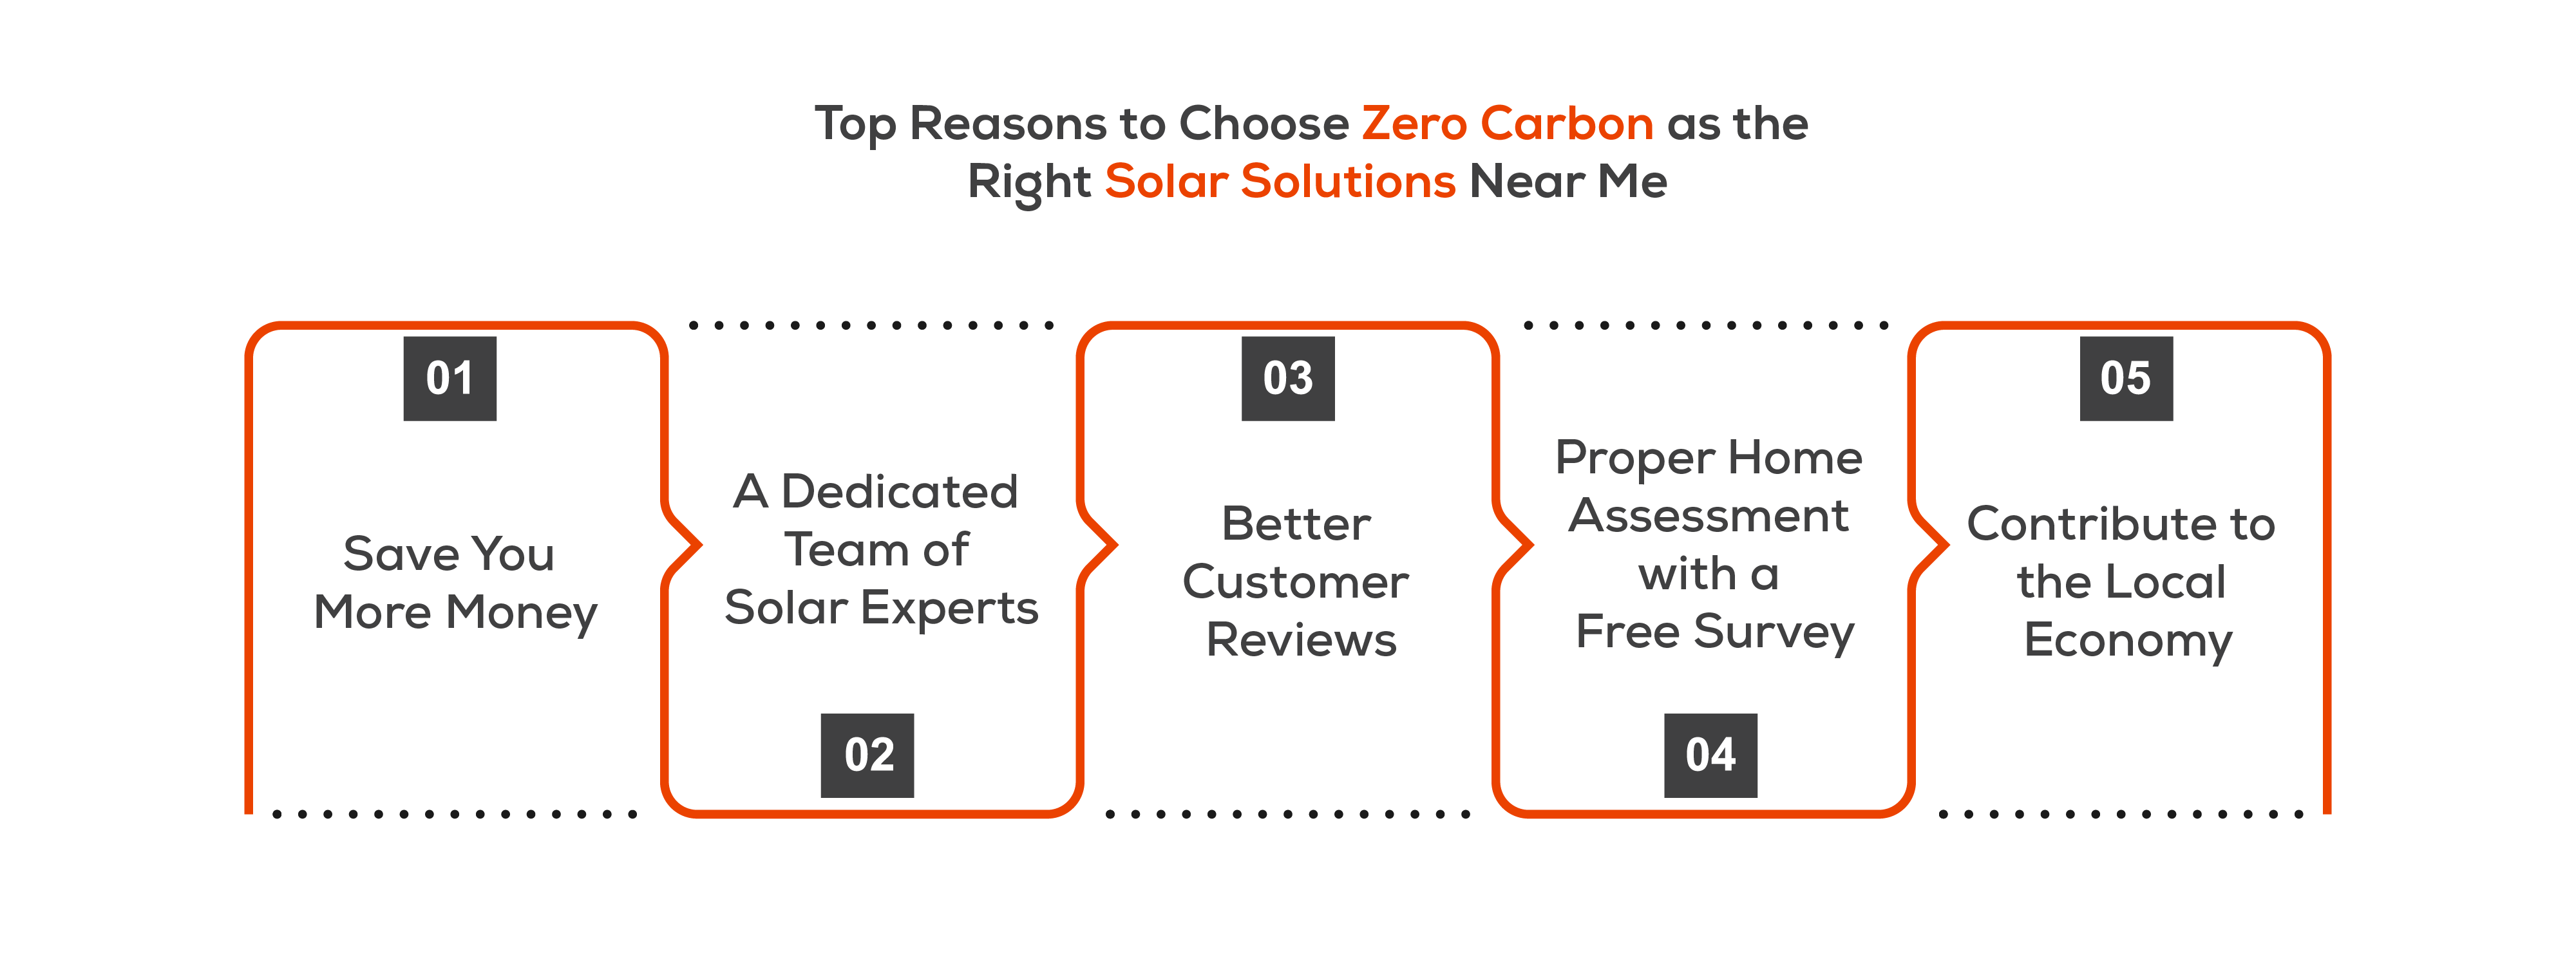 Top Reasons to Choose Zero Carbon as the Right Solar Solutions Near Me 